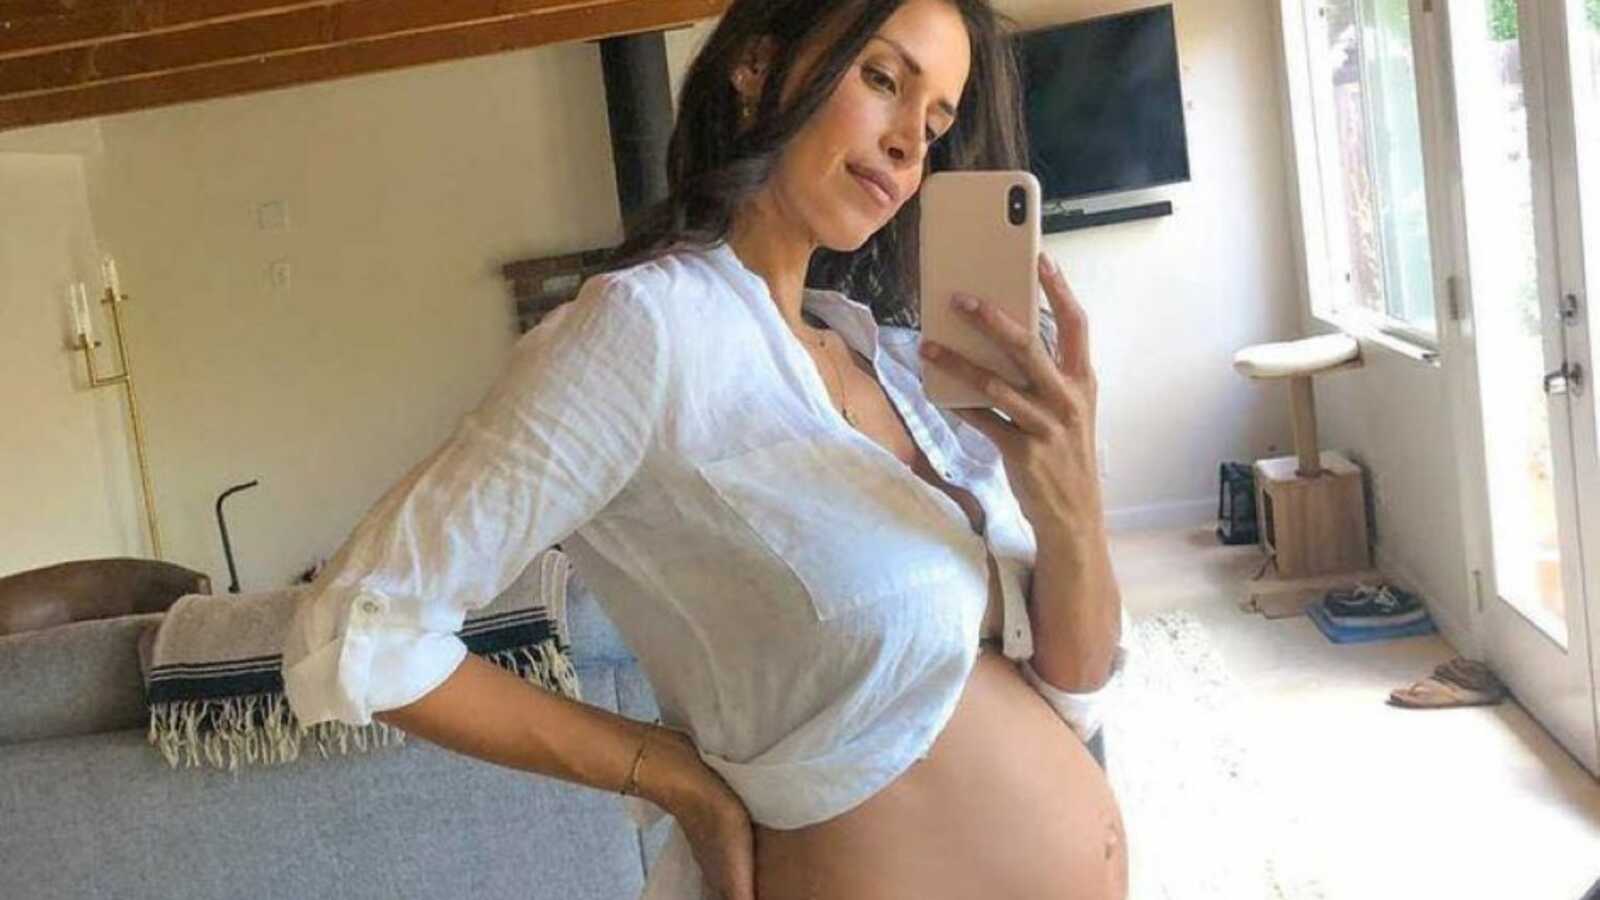 woman showing off her bare pregnancy belly in the mirror after her pregnancy loss